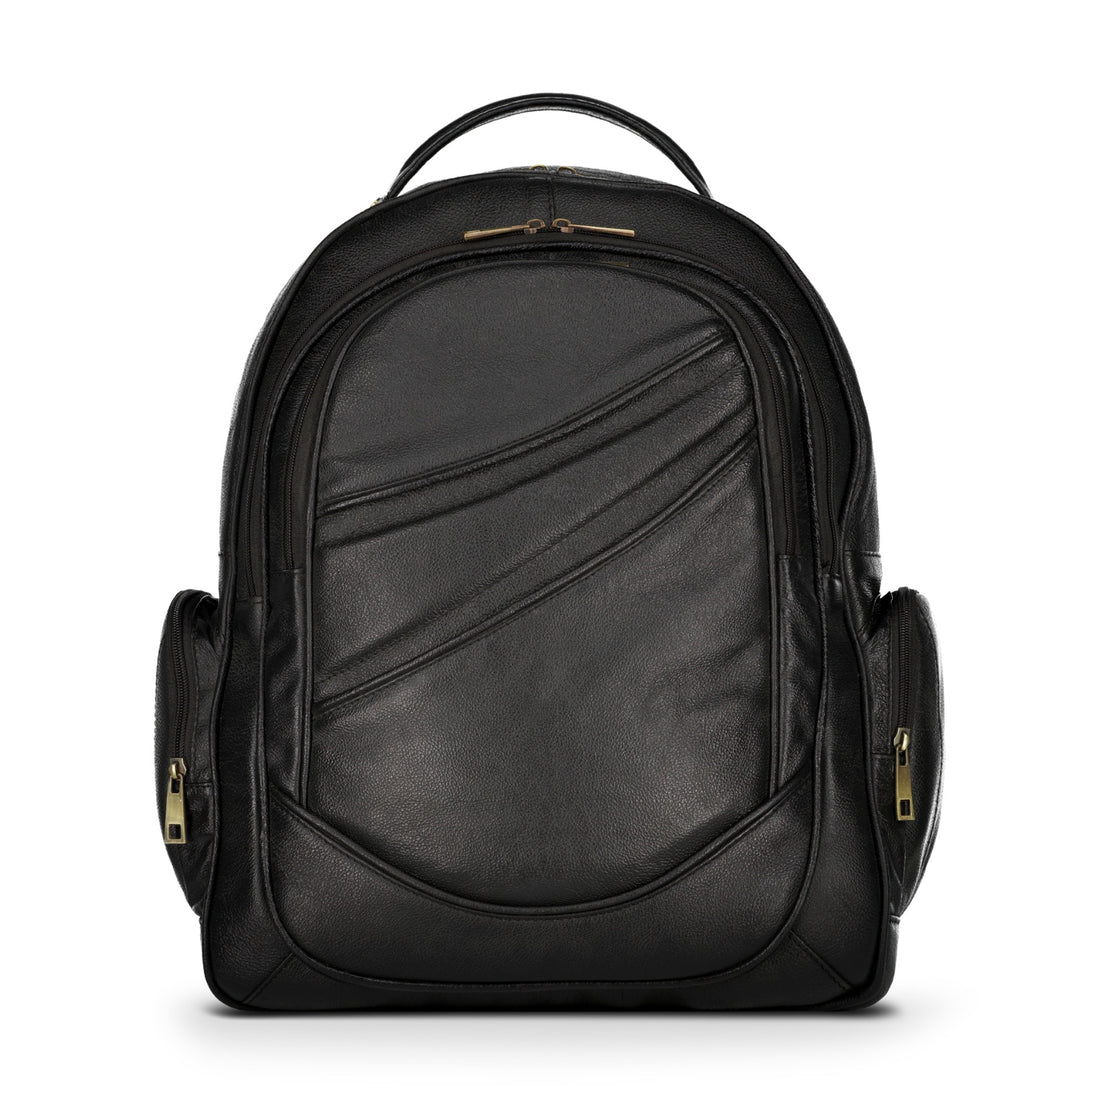 The Suza Backpack - Black - Bags by Urbbana